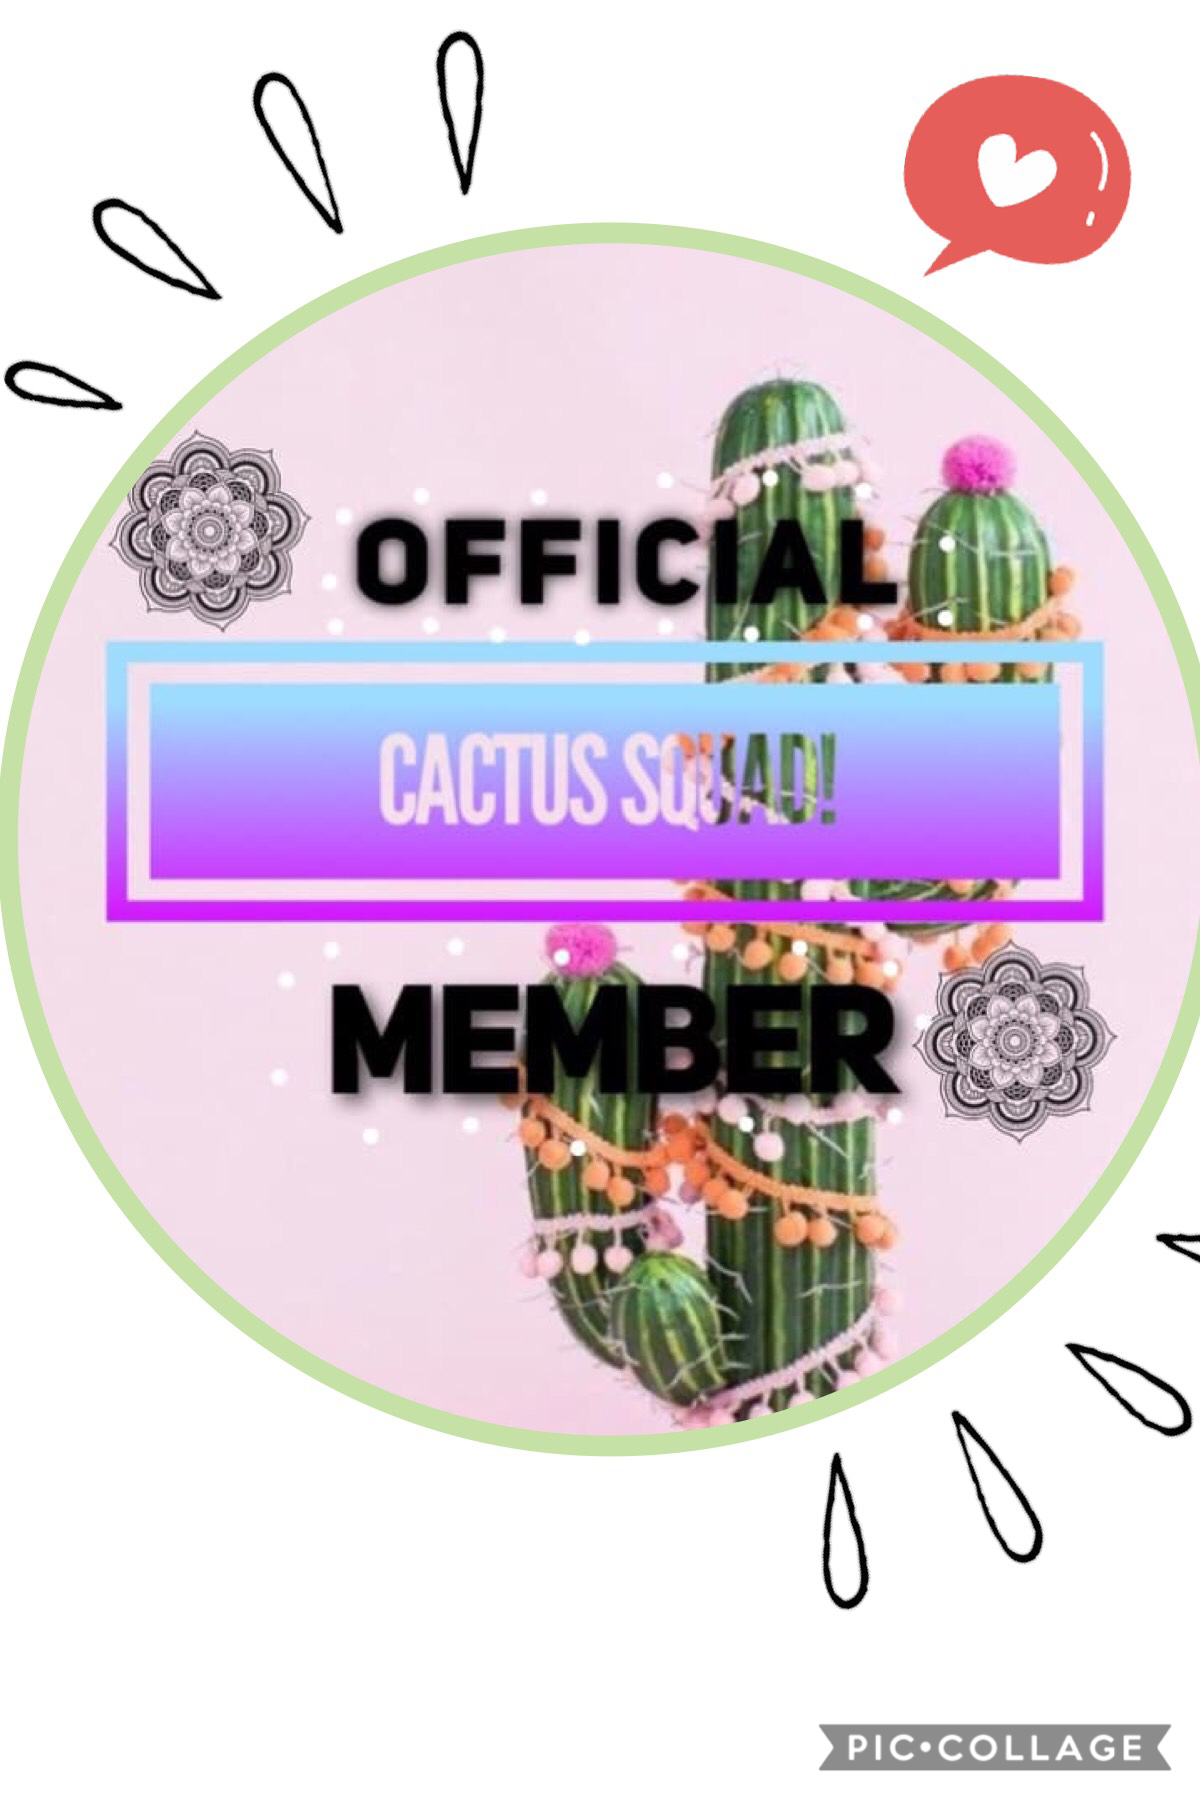 Join the cactus squad and spread the word! 🌵 